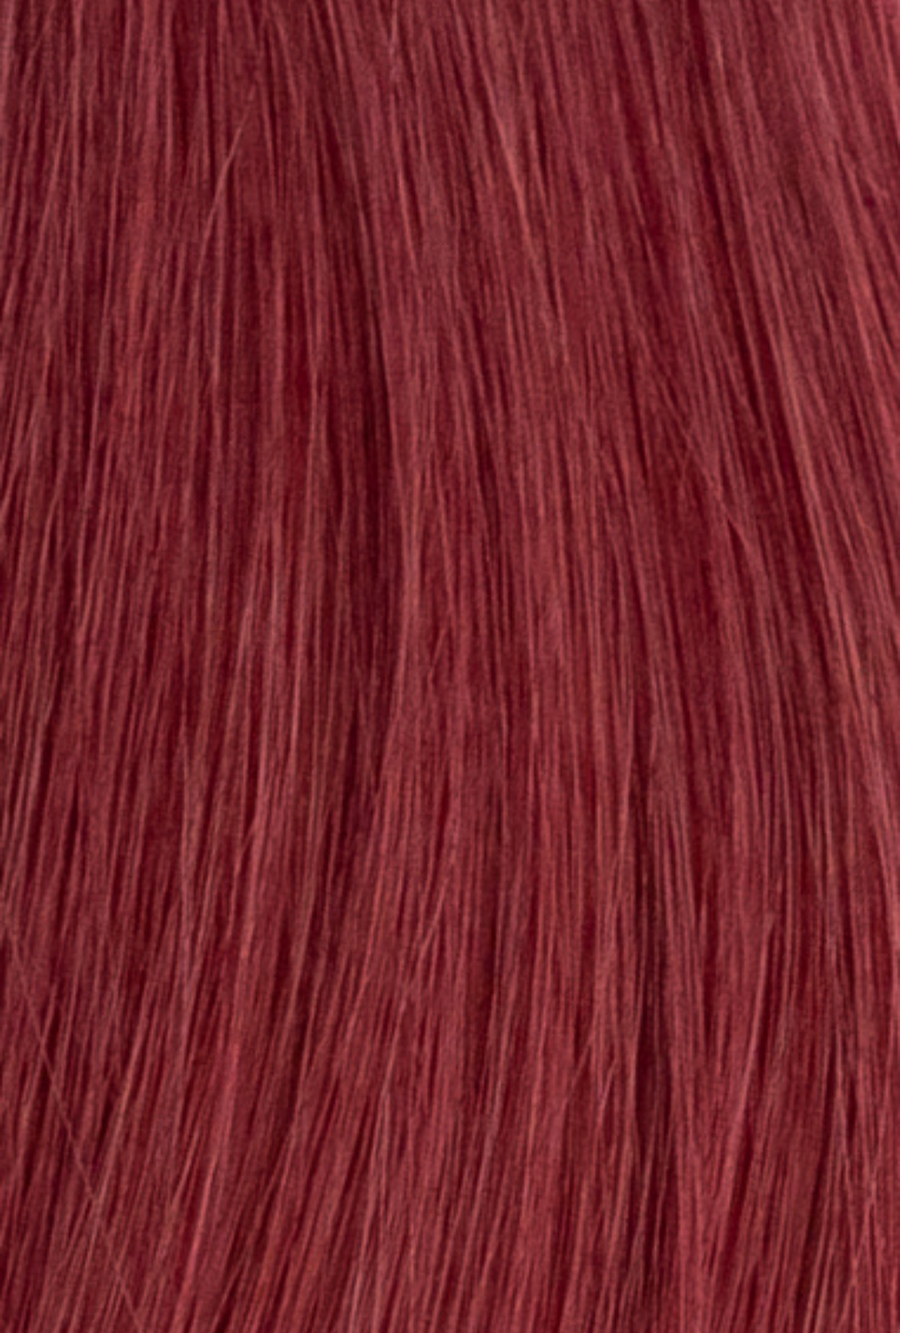 Laced Hair I-Tip Extensions Ruby Red